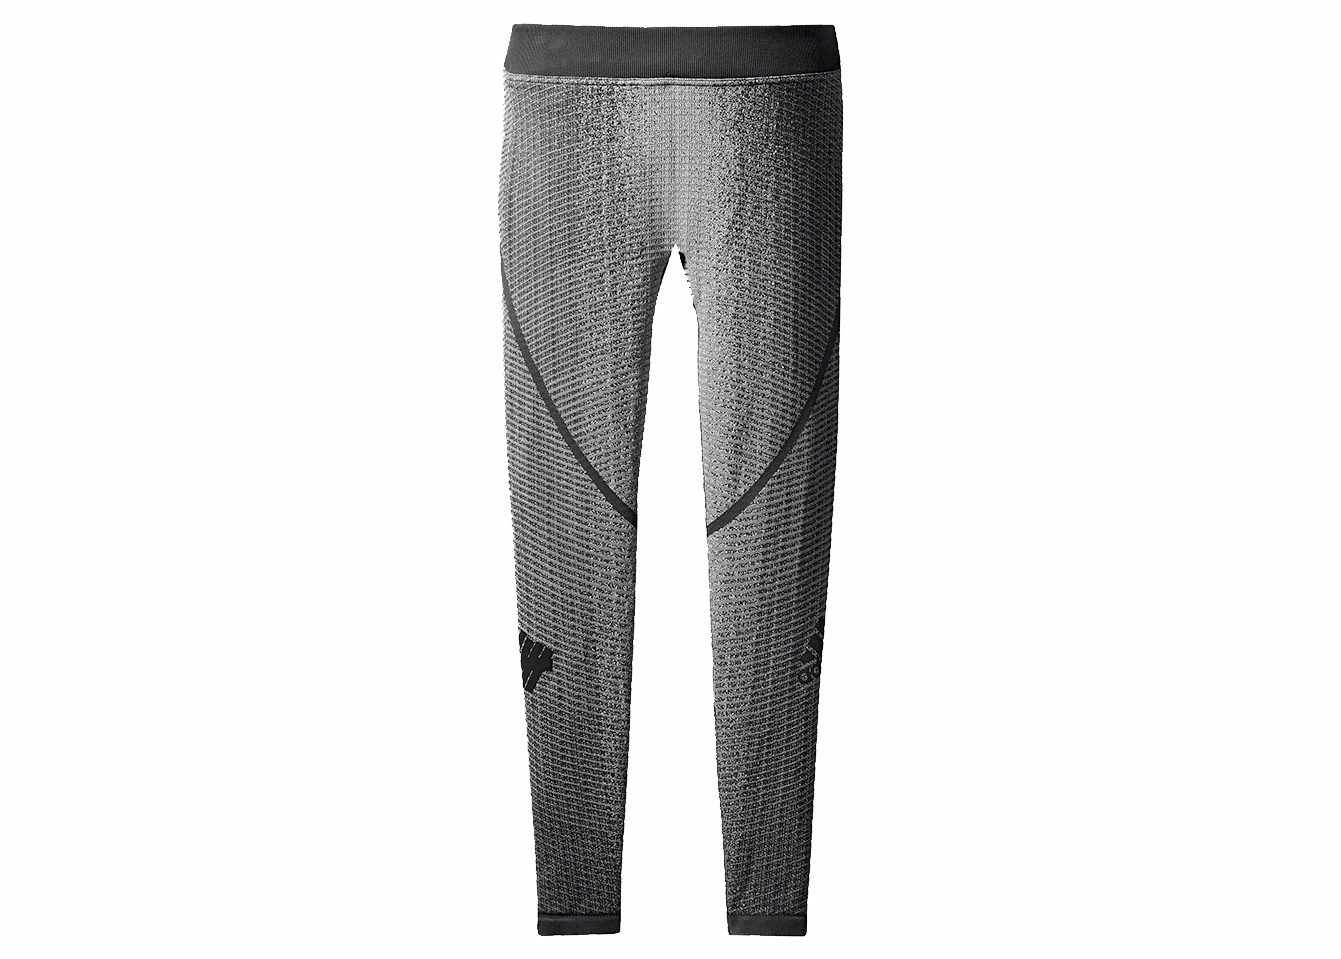 adidas x Undefeated Alphaskin Tech Heat Pants Gray/Solid Gray